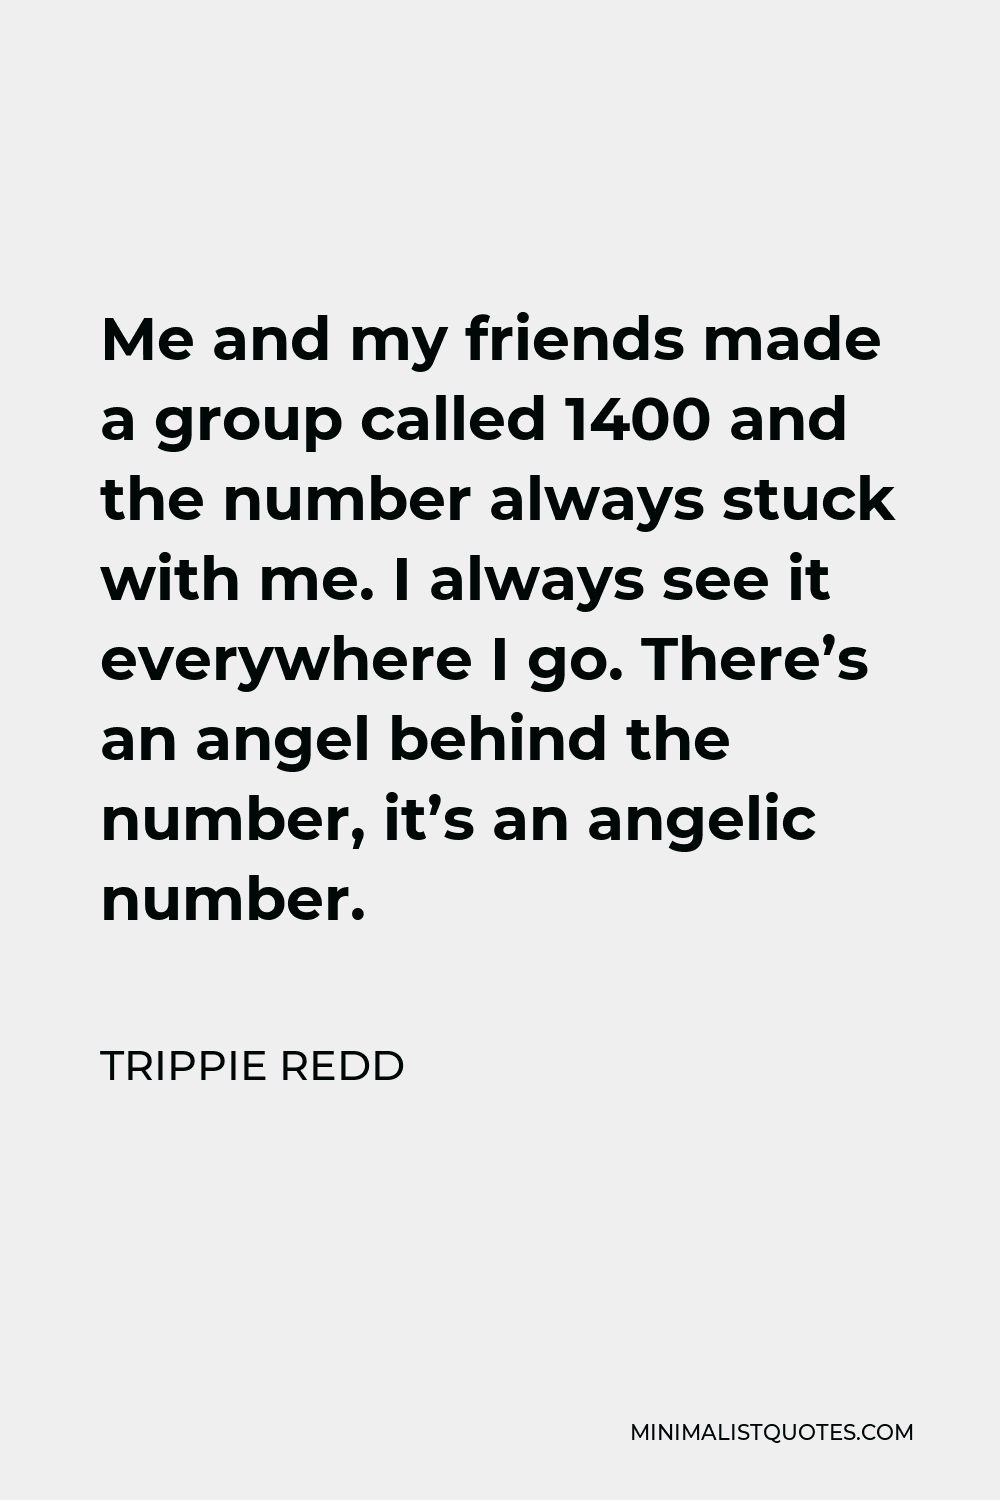 Trippie Redd Quote - Me and my friends made a group called 1400 and the number always stuck with me. I always see it everywhere I go. There’s an angel behind the number, it’s an angelic number.